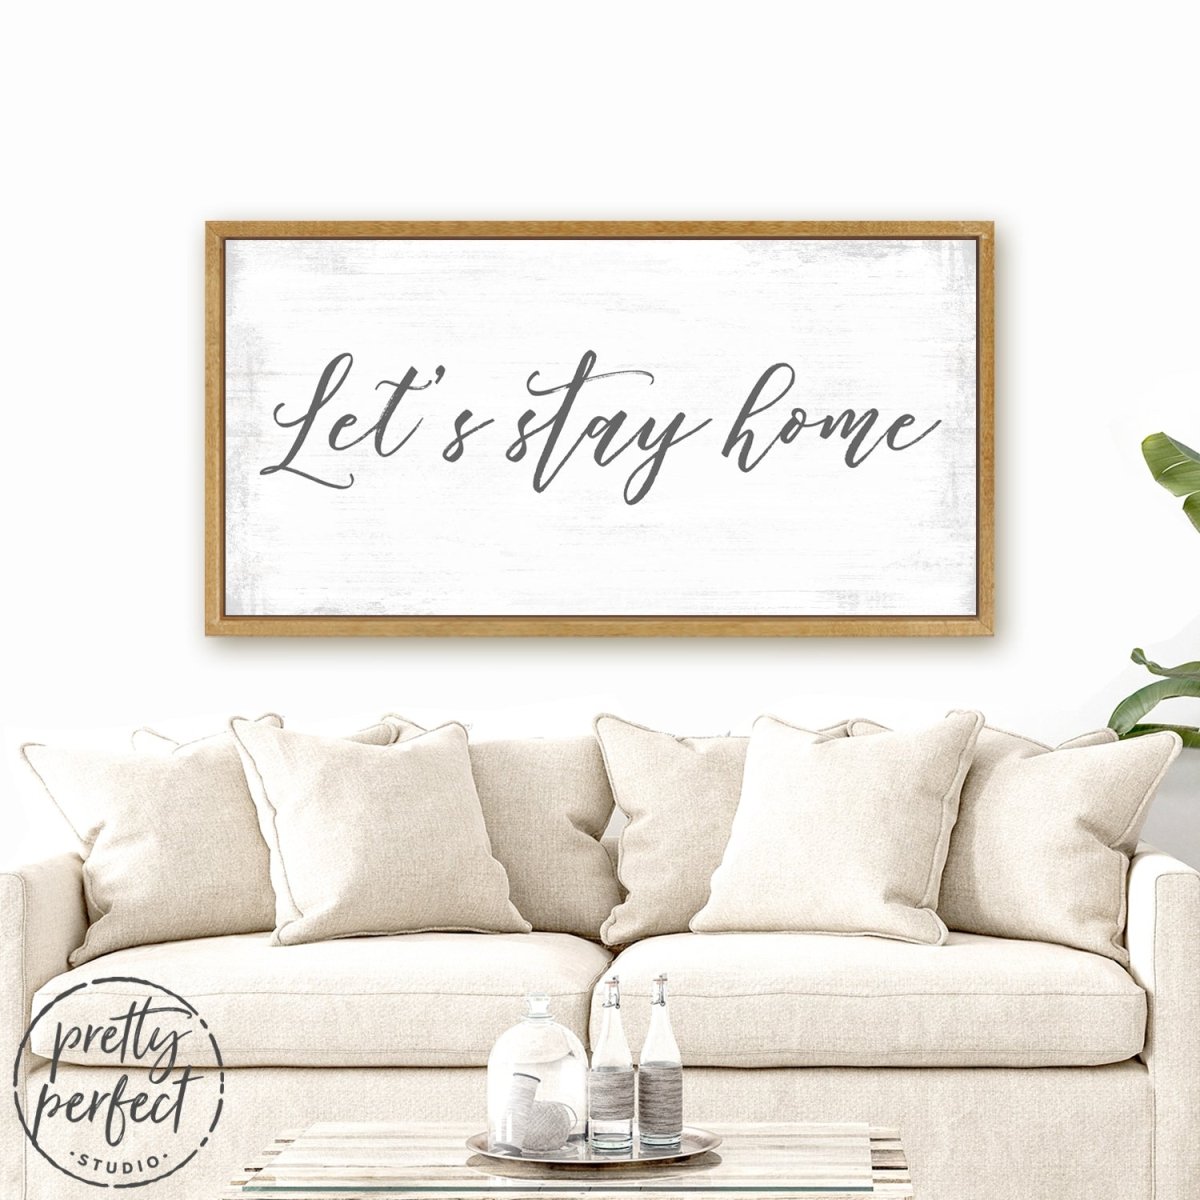 Let's Stay Home Sign Above the Couch - Pretty Perfect Studio